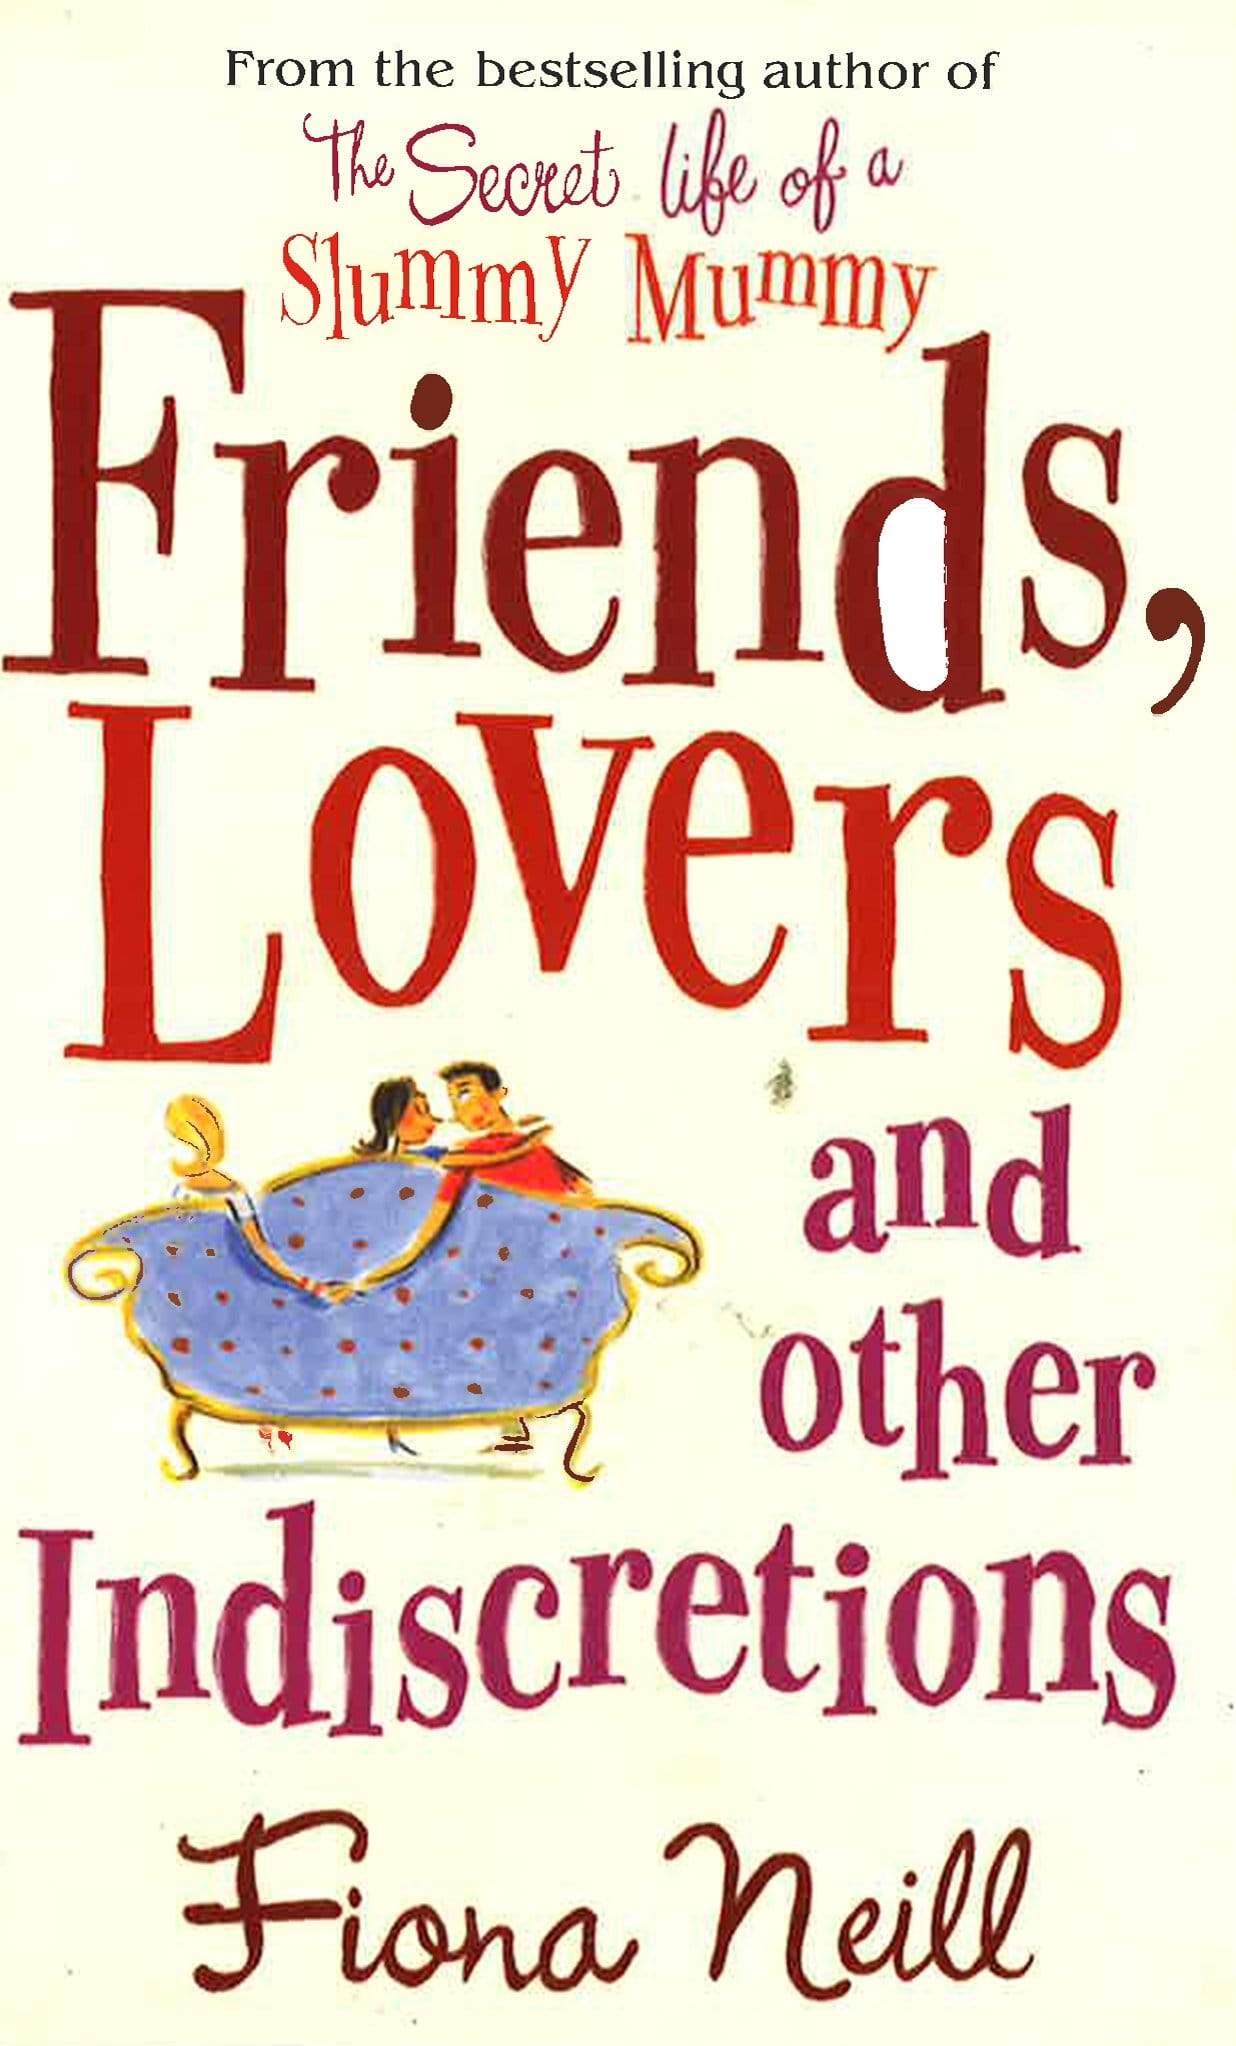 Friends, Lovers & Other Indiscrections